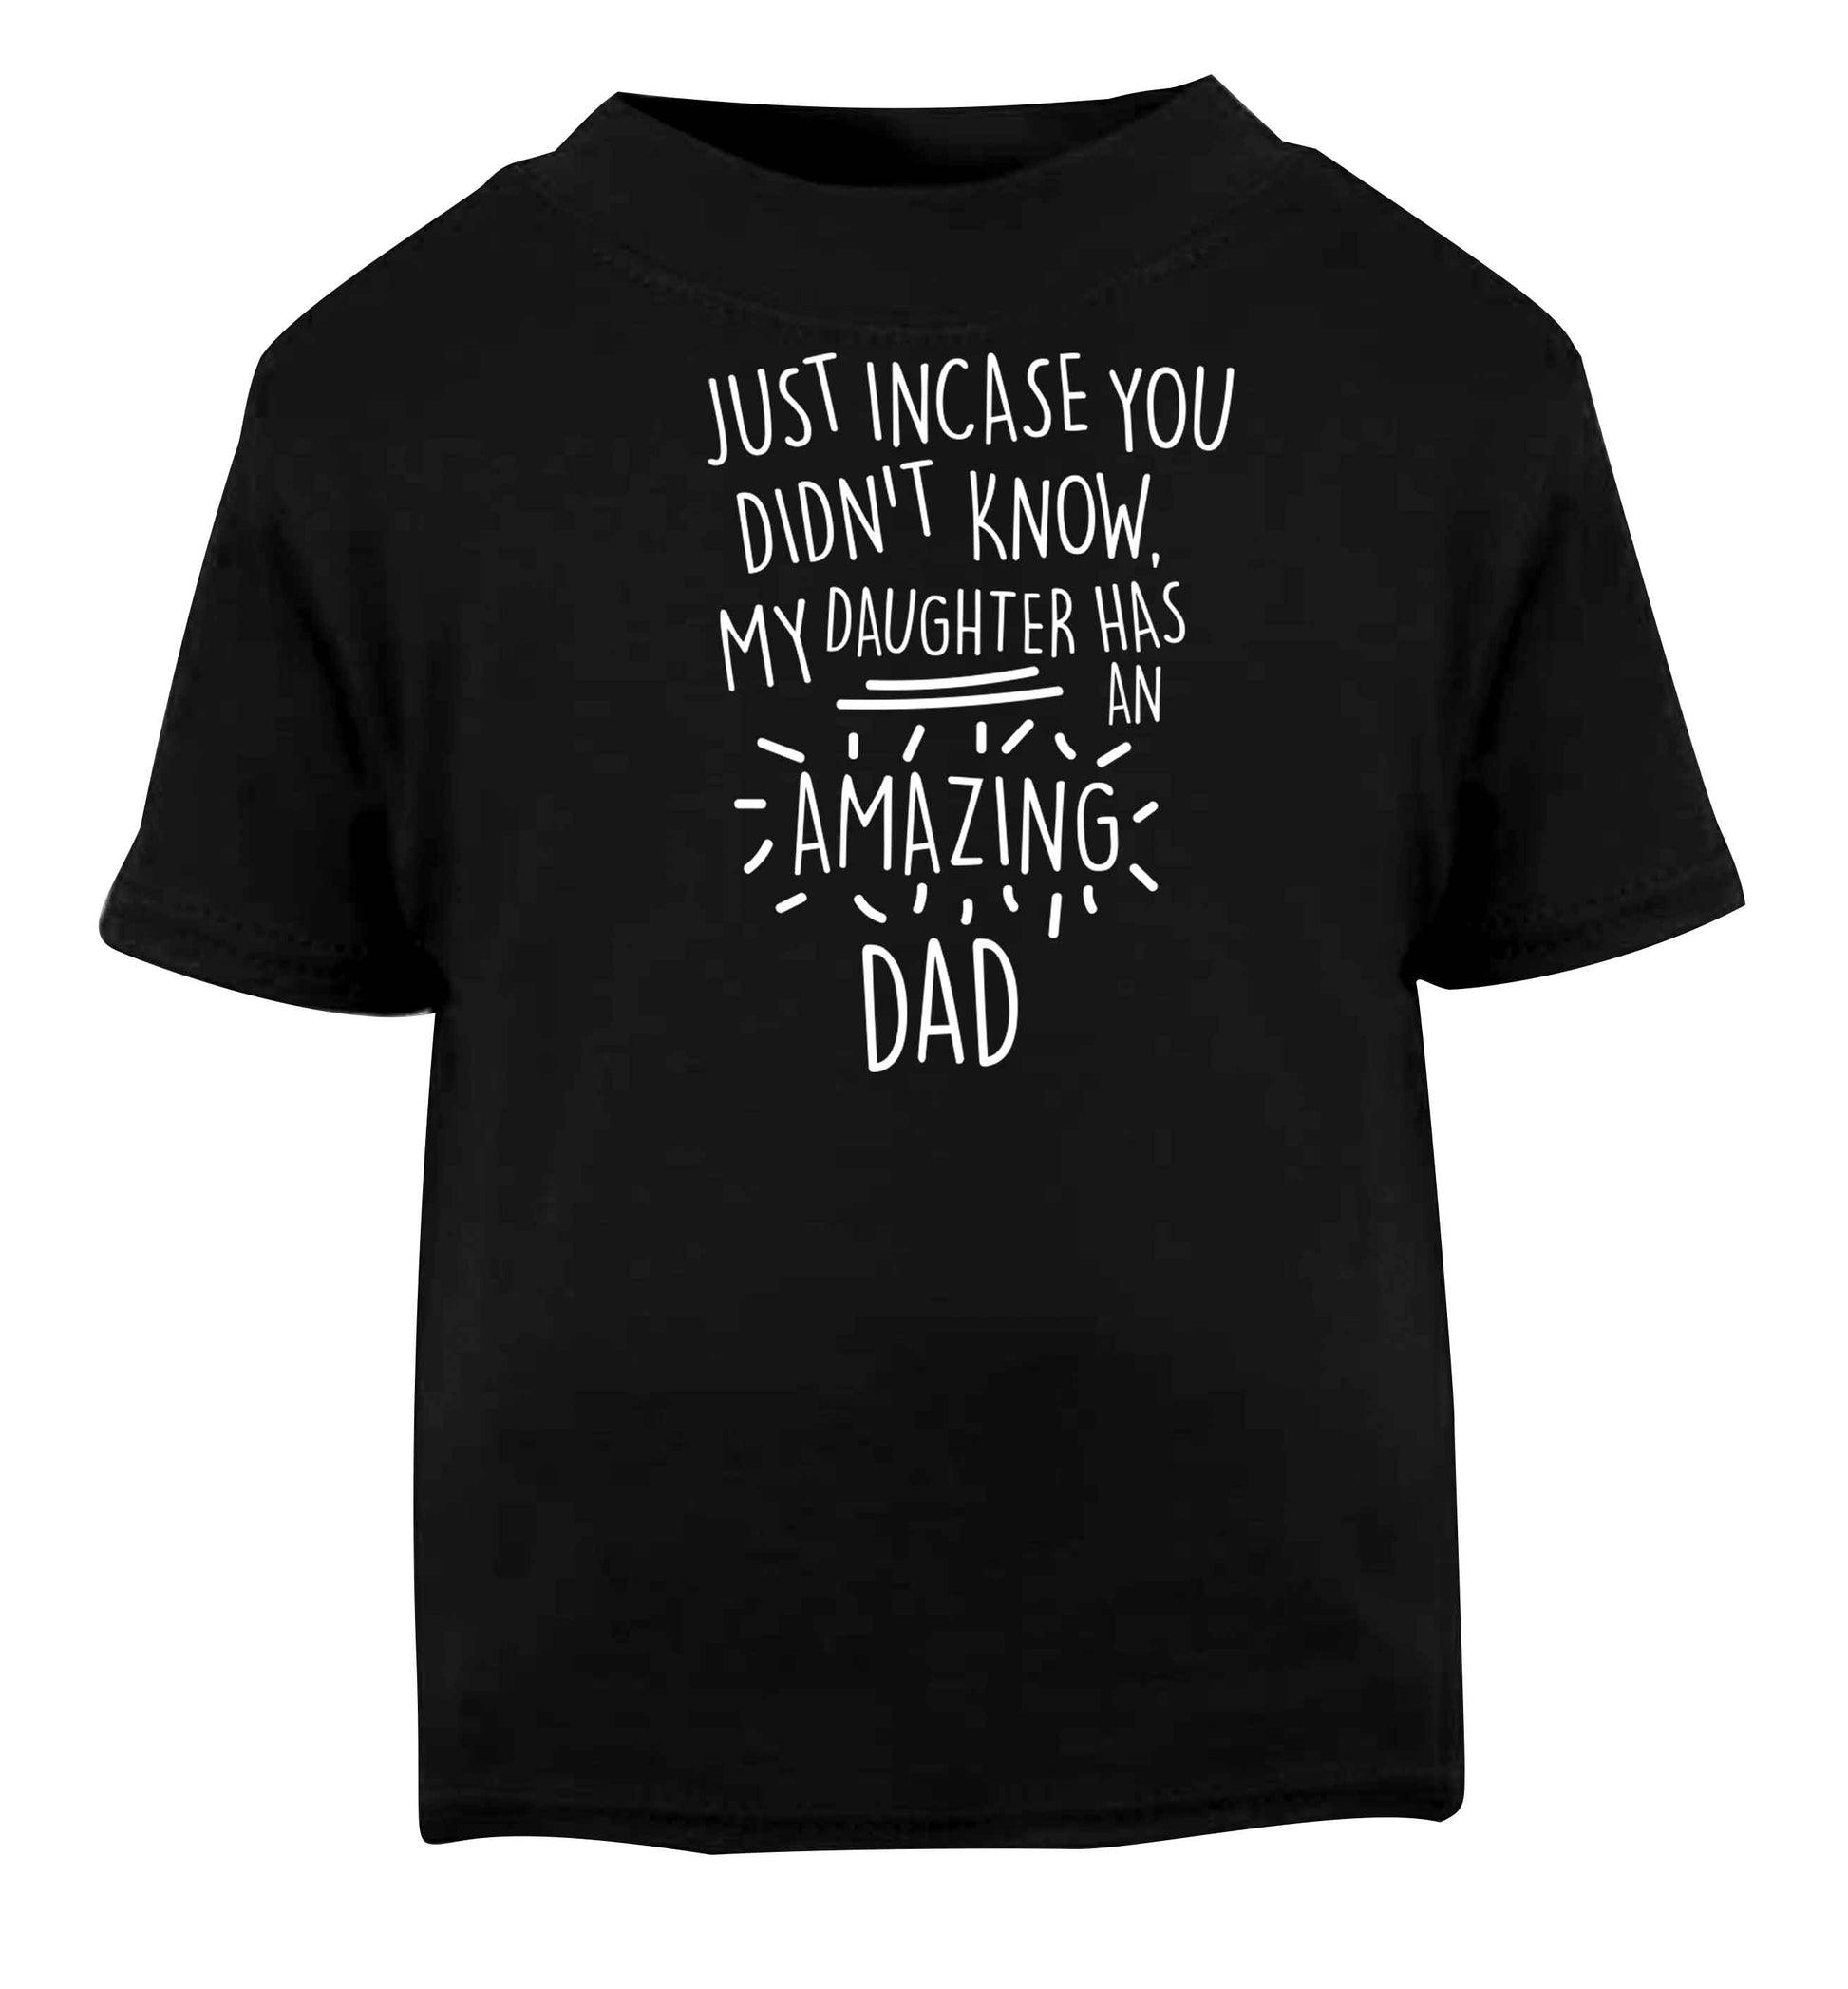 Just incase you didn't know my daughter has an amazing dad Black baby toddler Tshirt 2 years